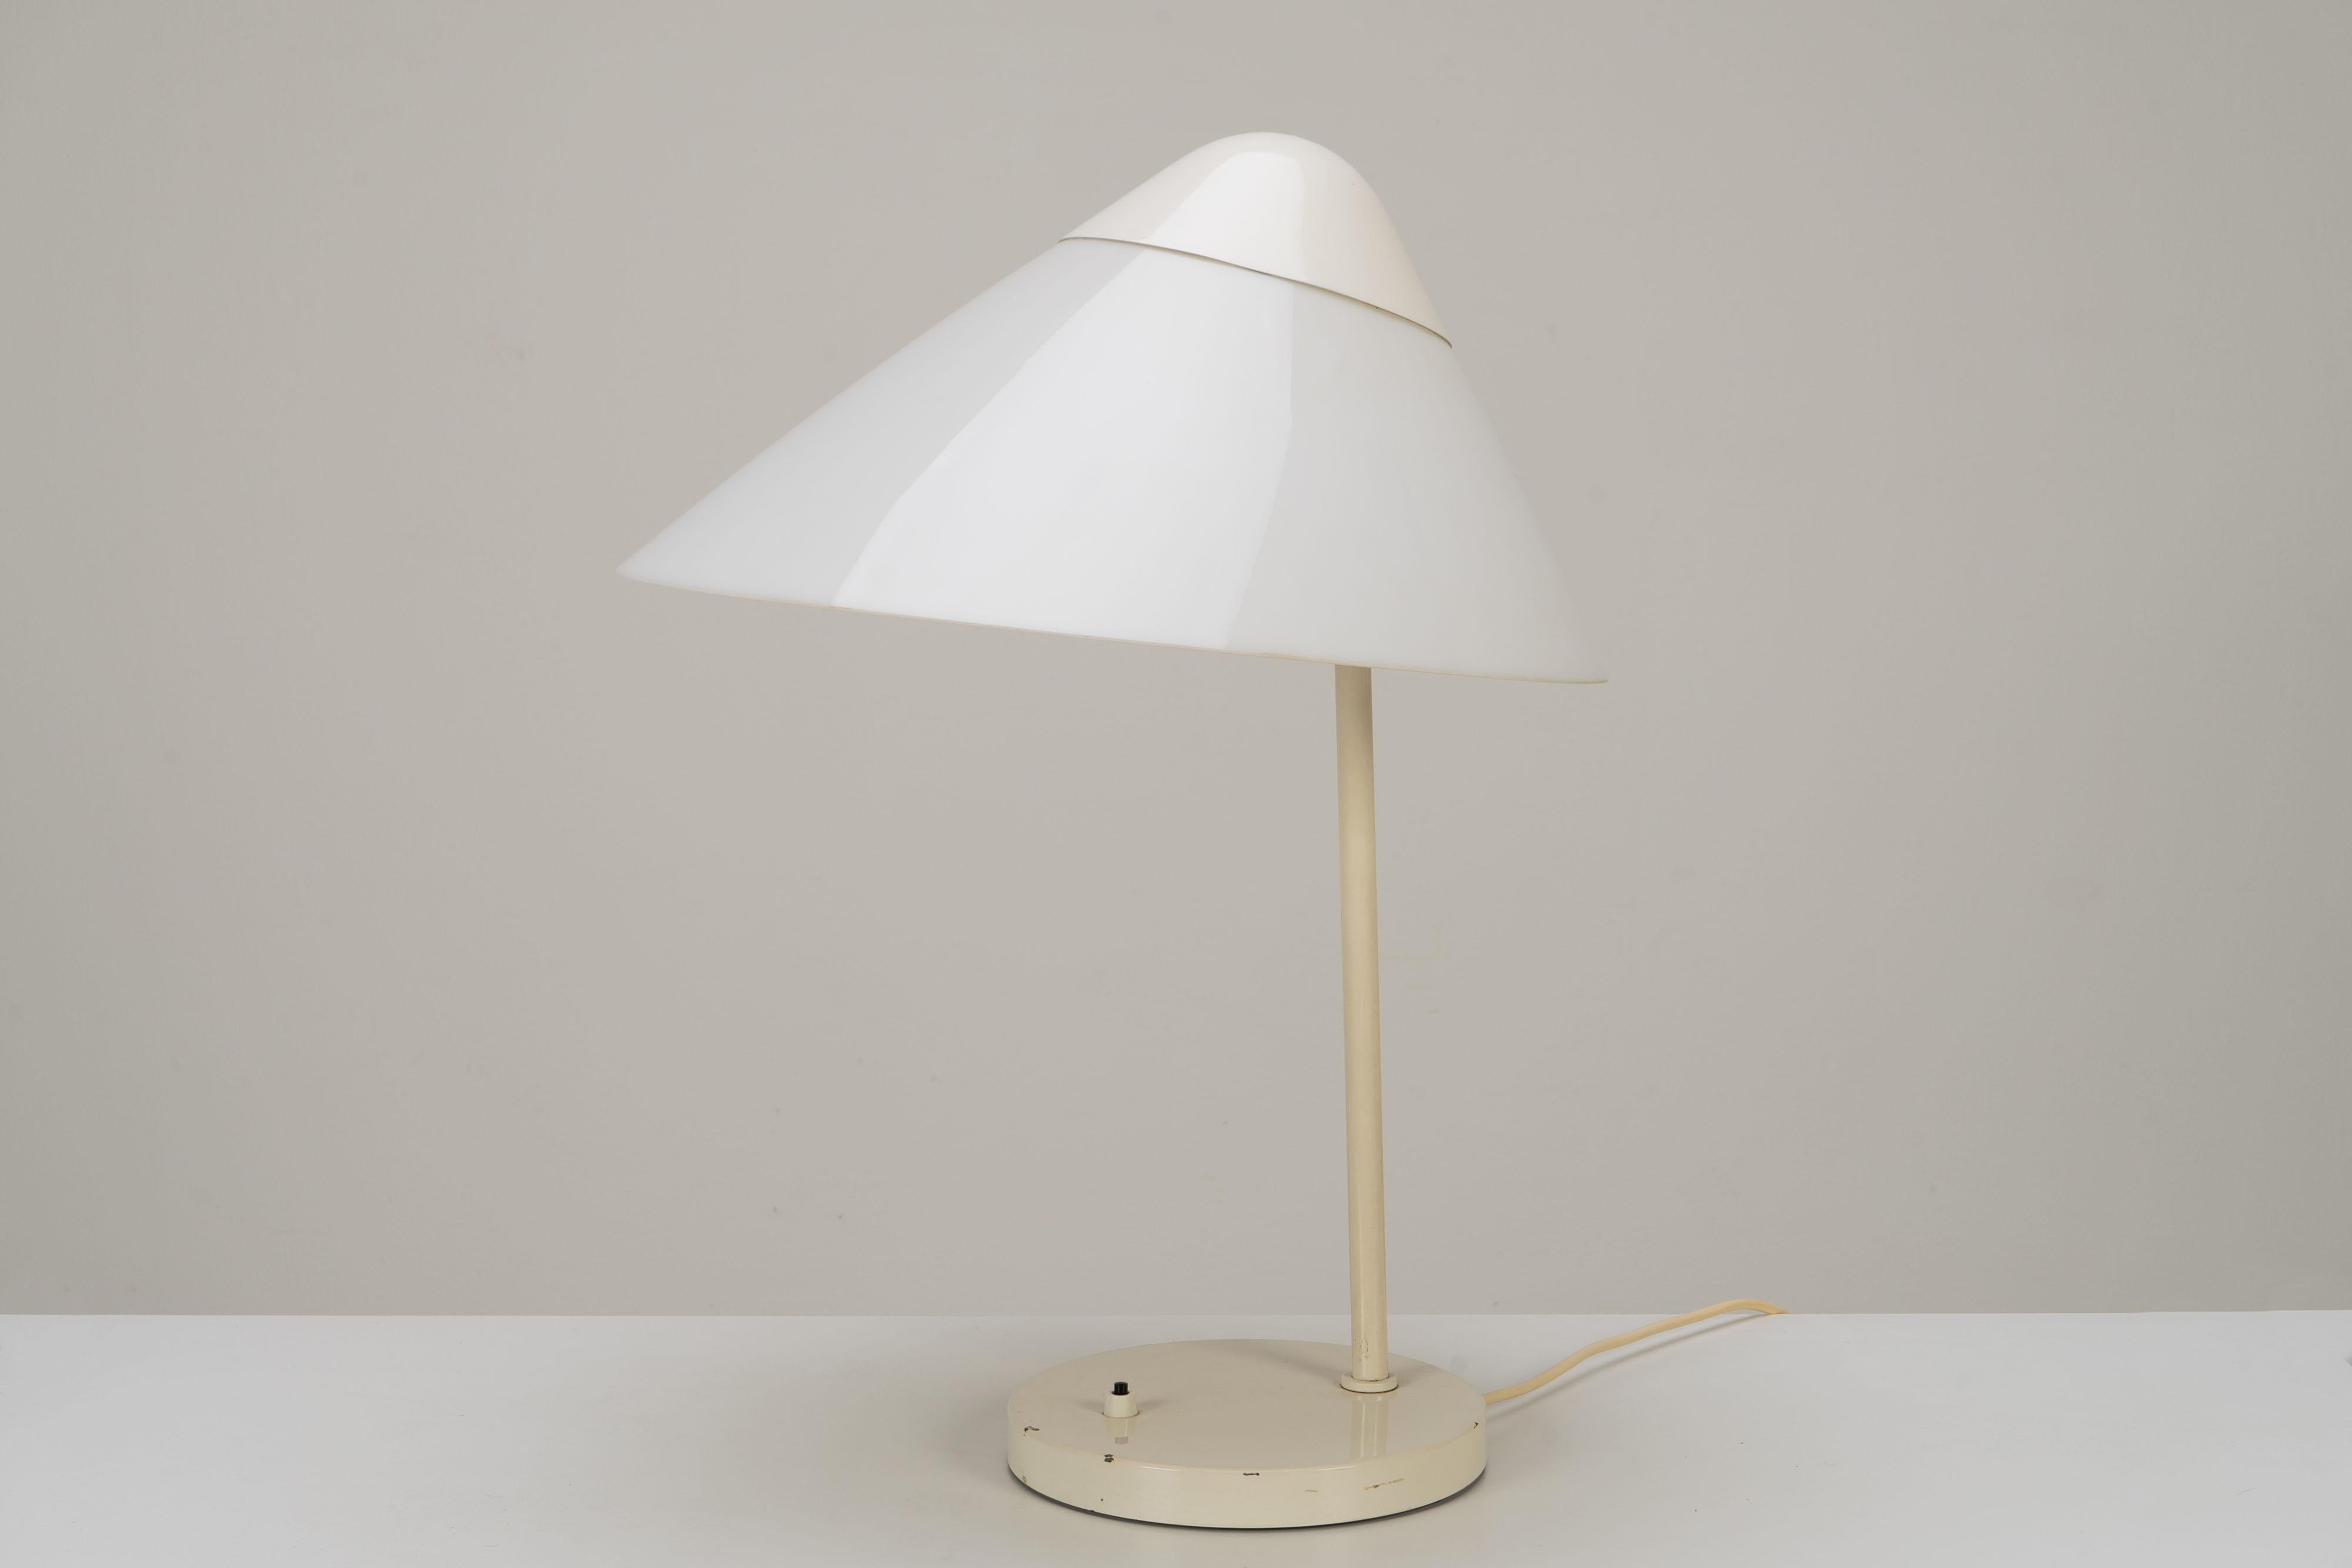 Large table lamp designed by Hans J. Wegner for Louis Poulsen. Early edition.